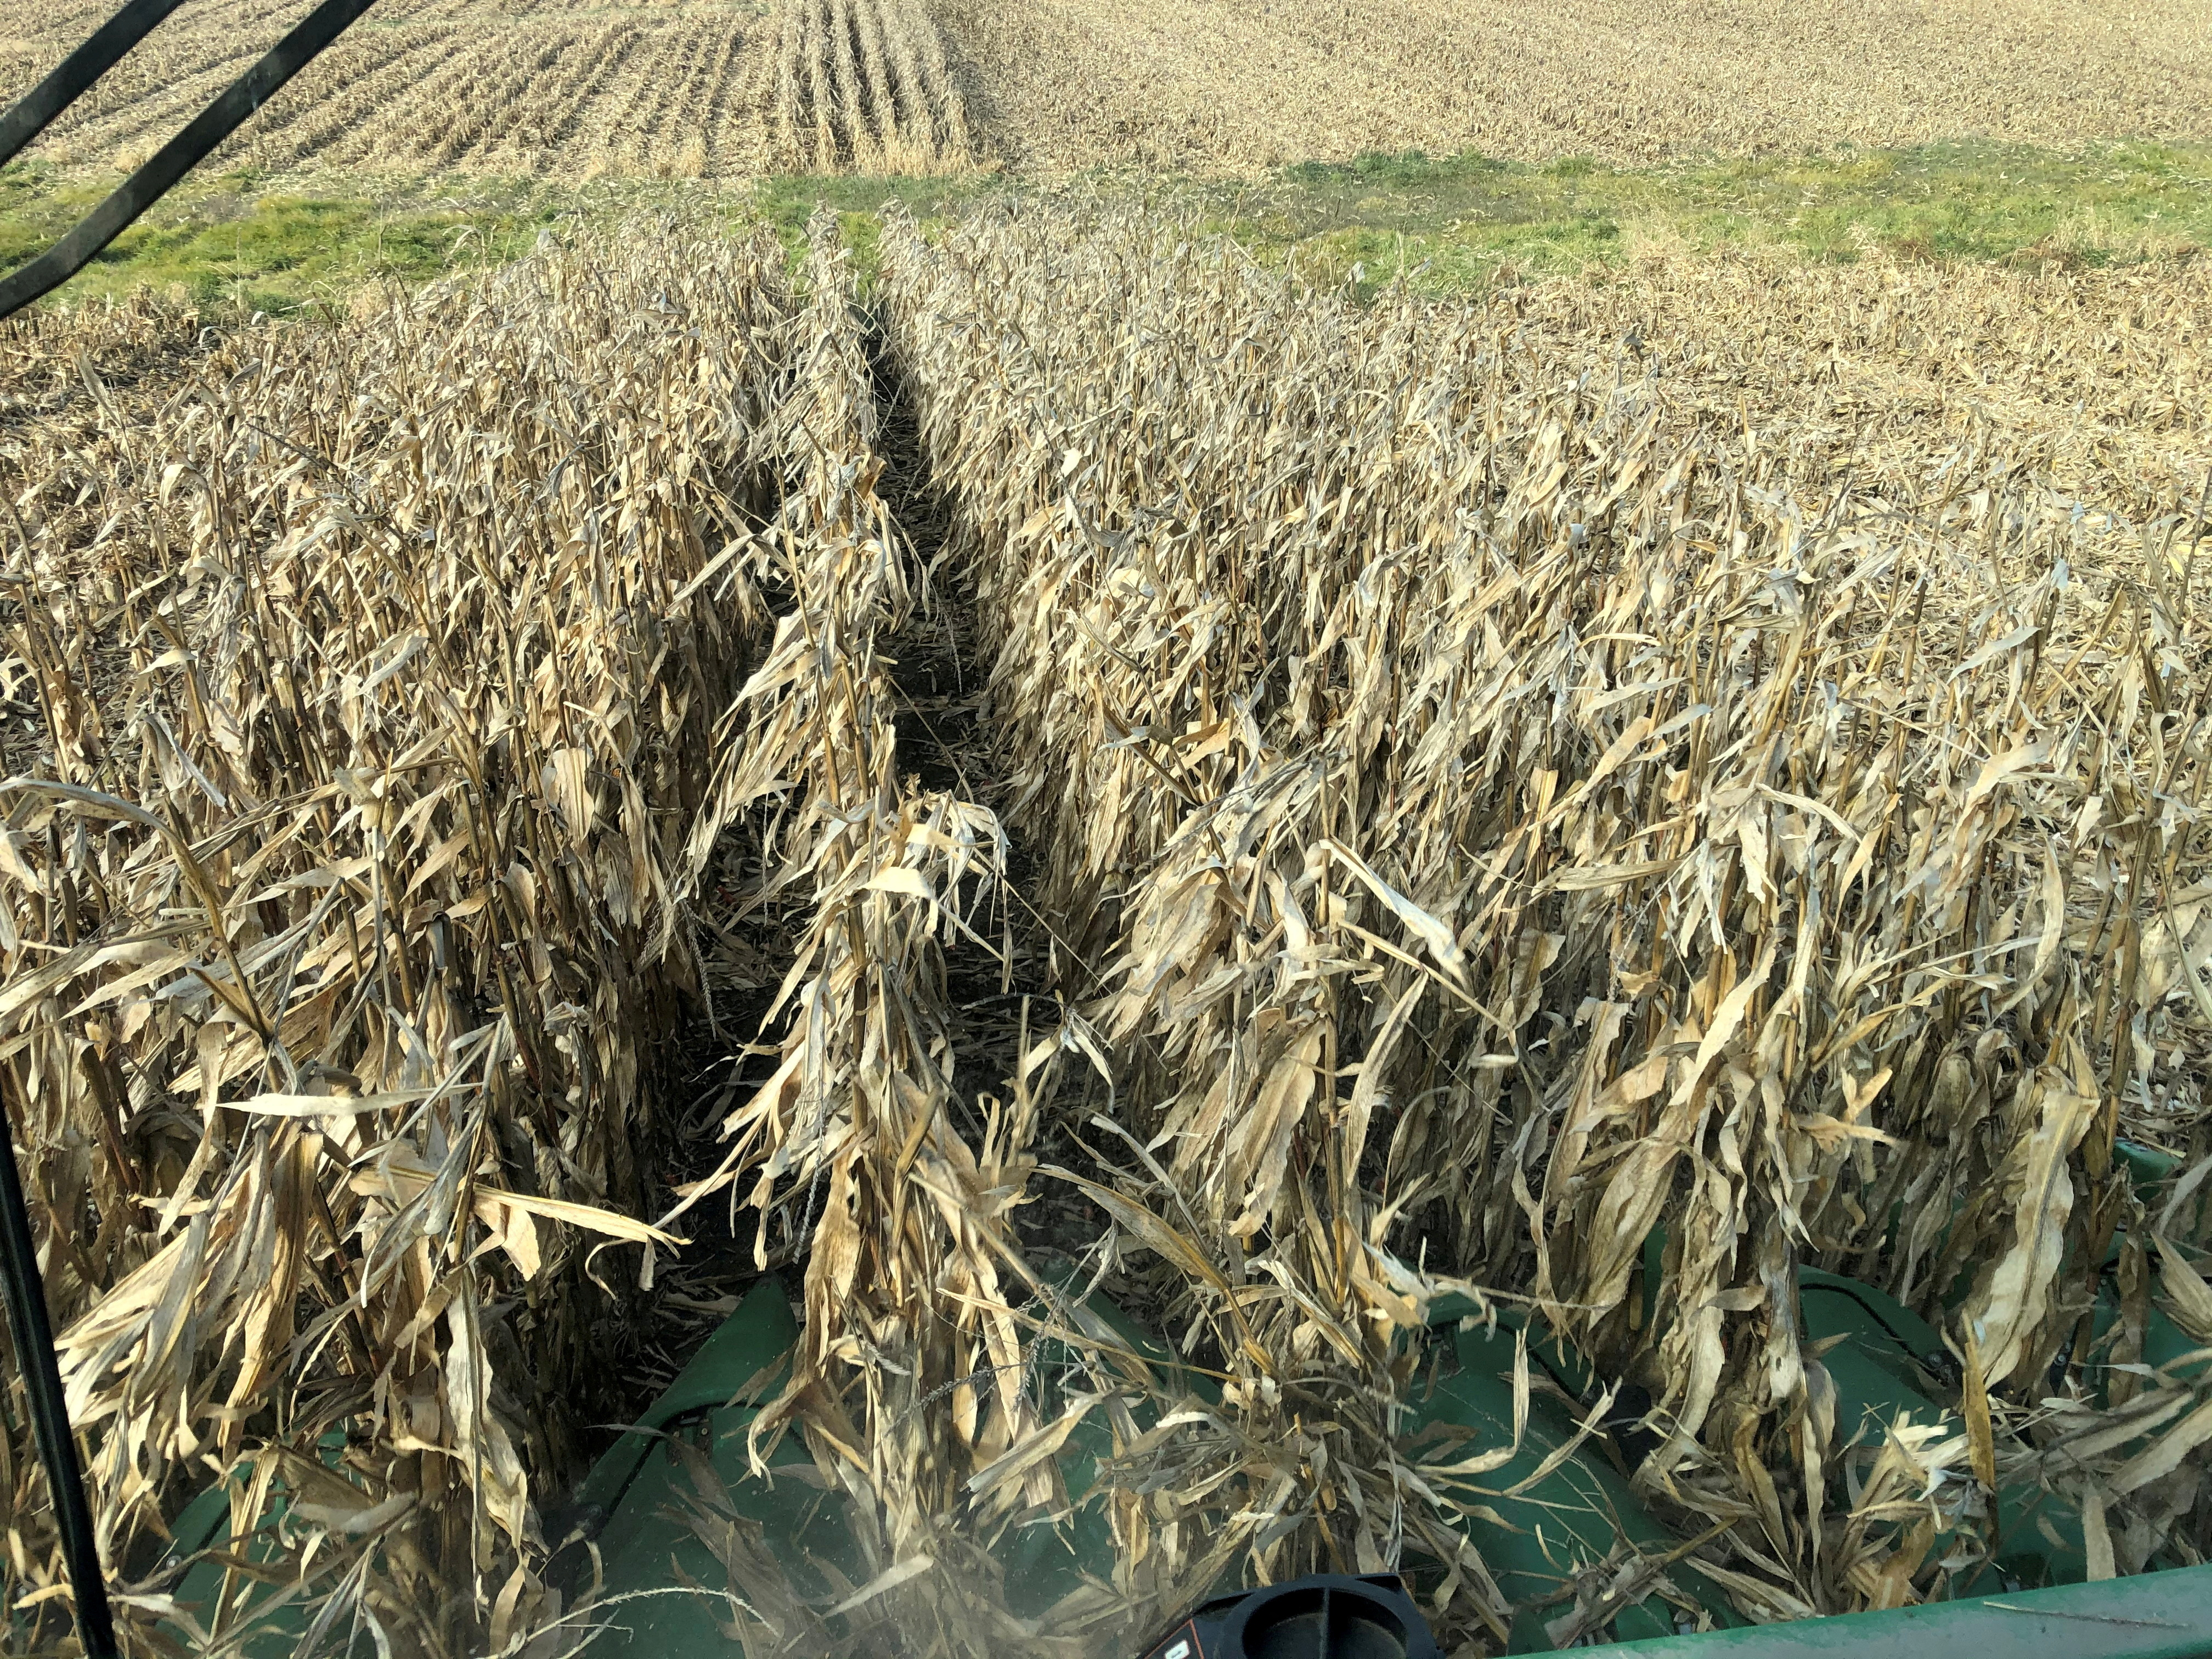 Corn crops are seen being harvested from inside a farmer's combine in Eldon, Iowa